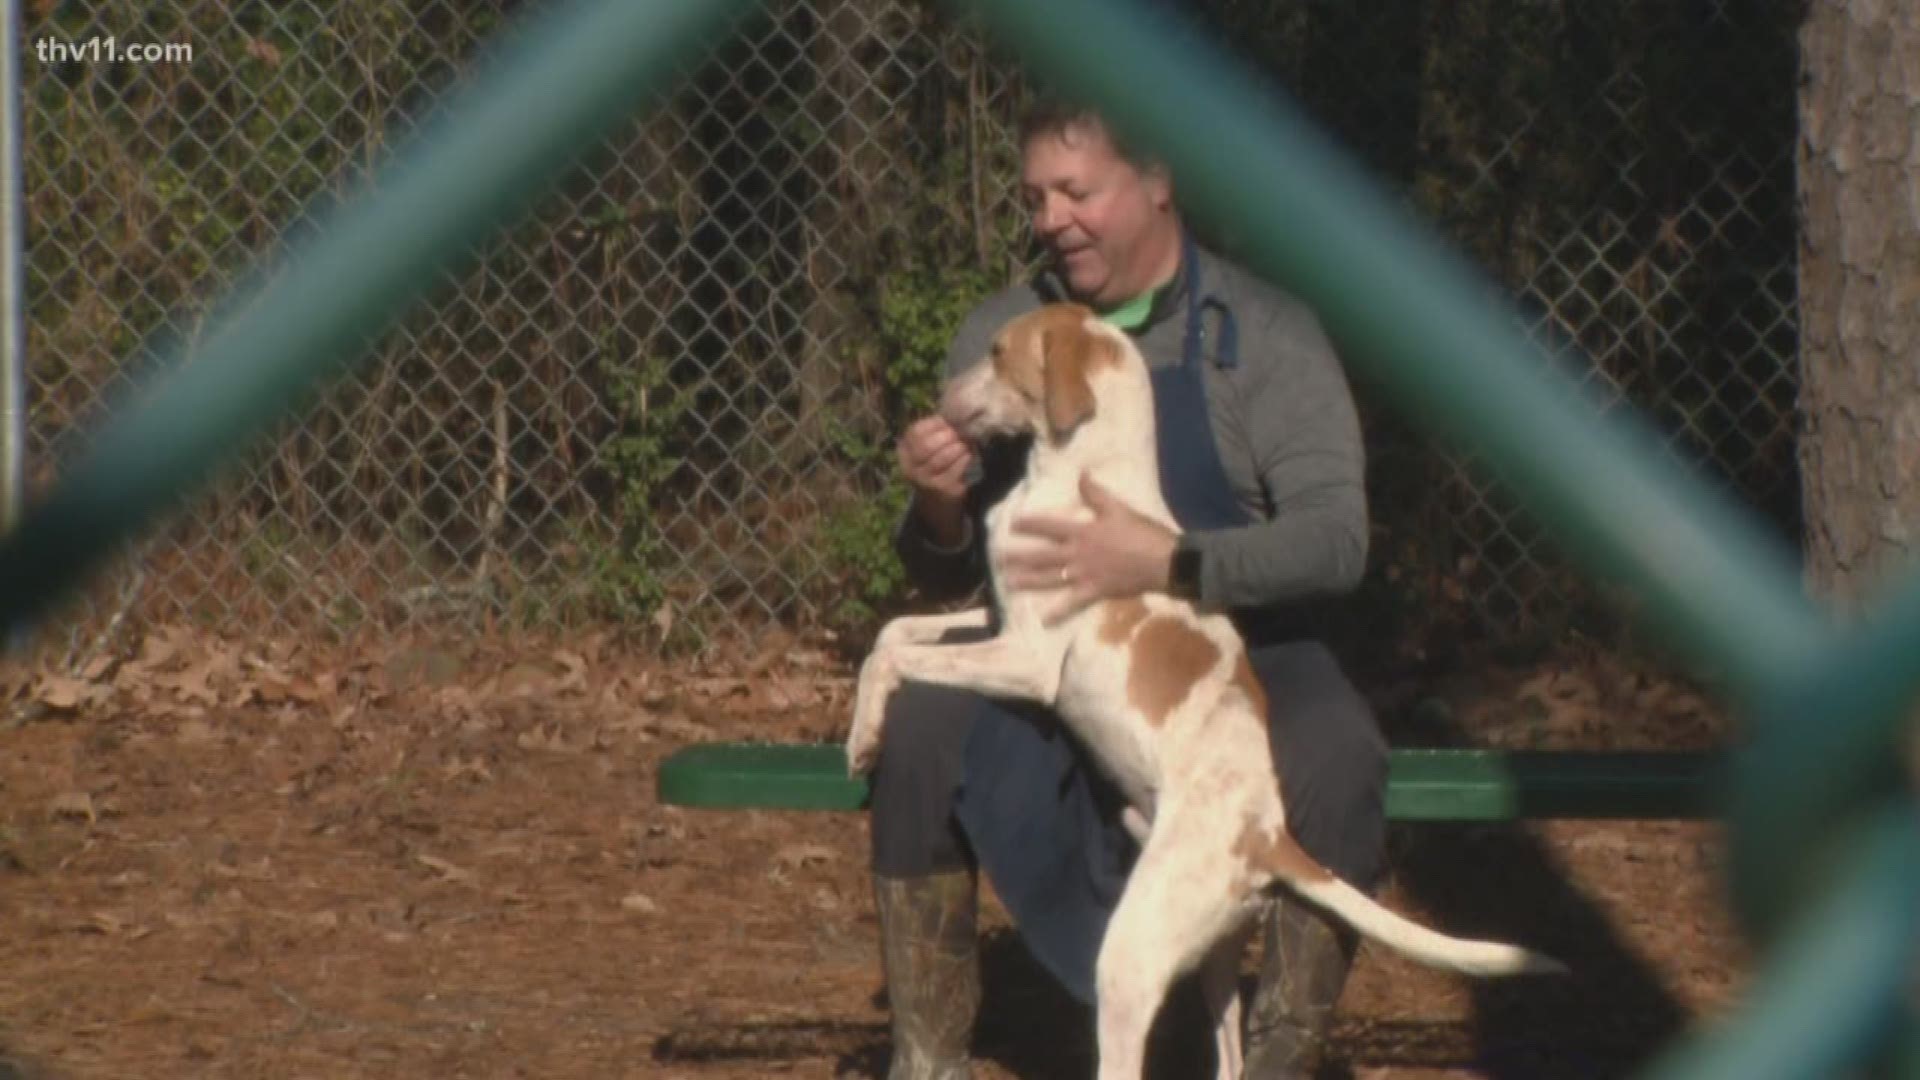 The Little Rock Animal Village is at full capacity - which is why they're waiving adoption fees for dogs six months and older.